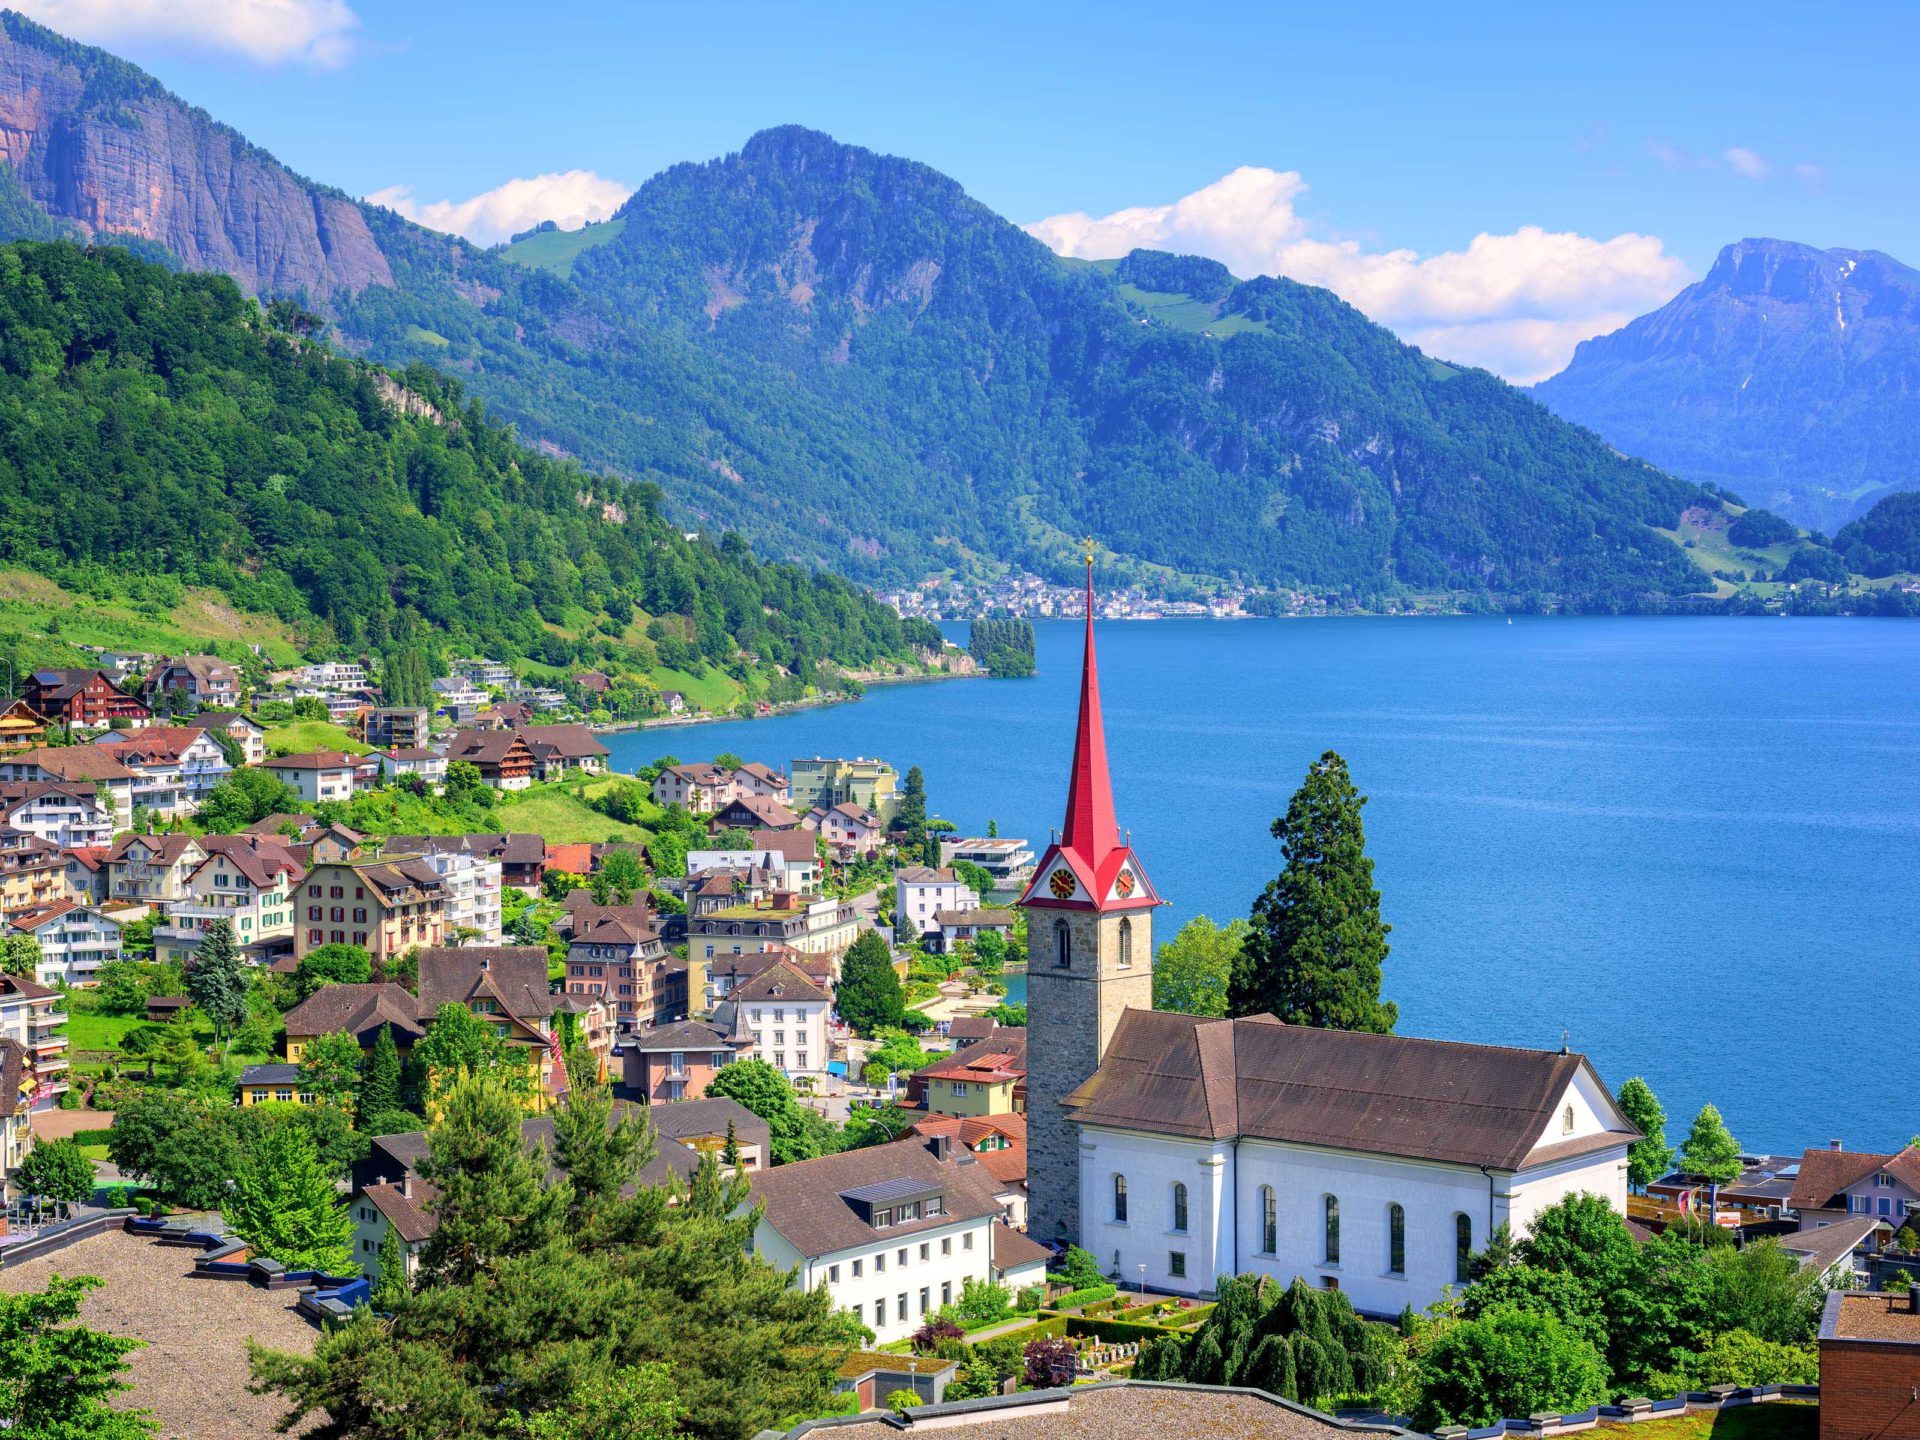 Lake Lucerne In Switzerland Little Swiss Town With Gothic Church On Lake Lucerne And Alps Photo Landscape 4k Ultra HD Wallpaper For Desktop Laptop Tablet Mobile Phones And Tv, Wallpaper13.com